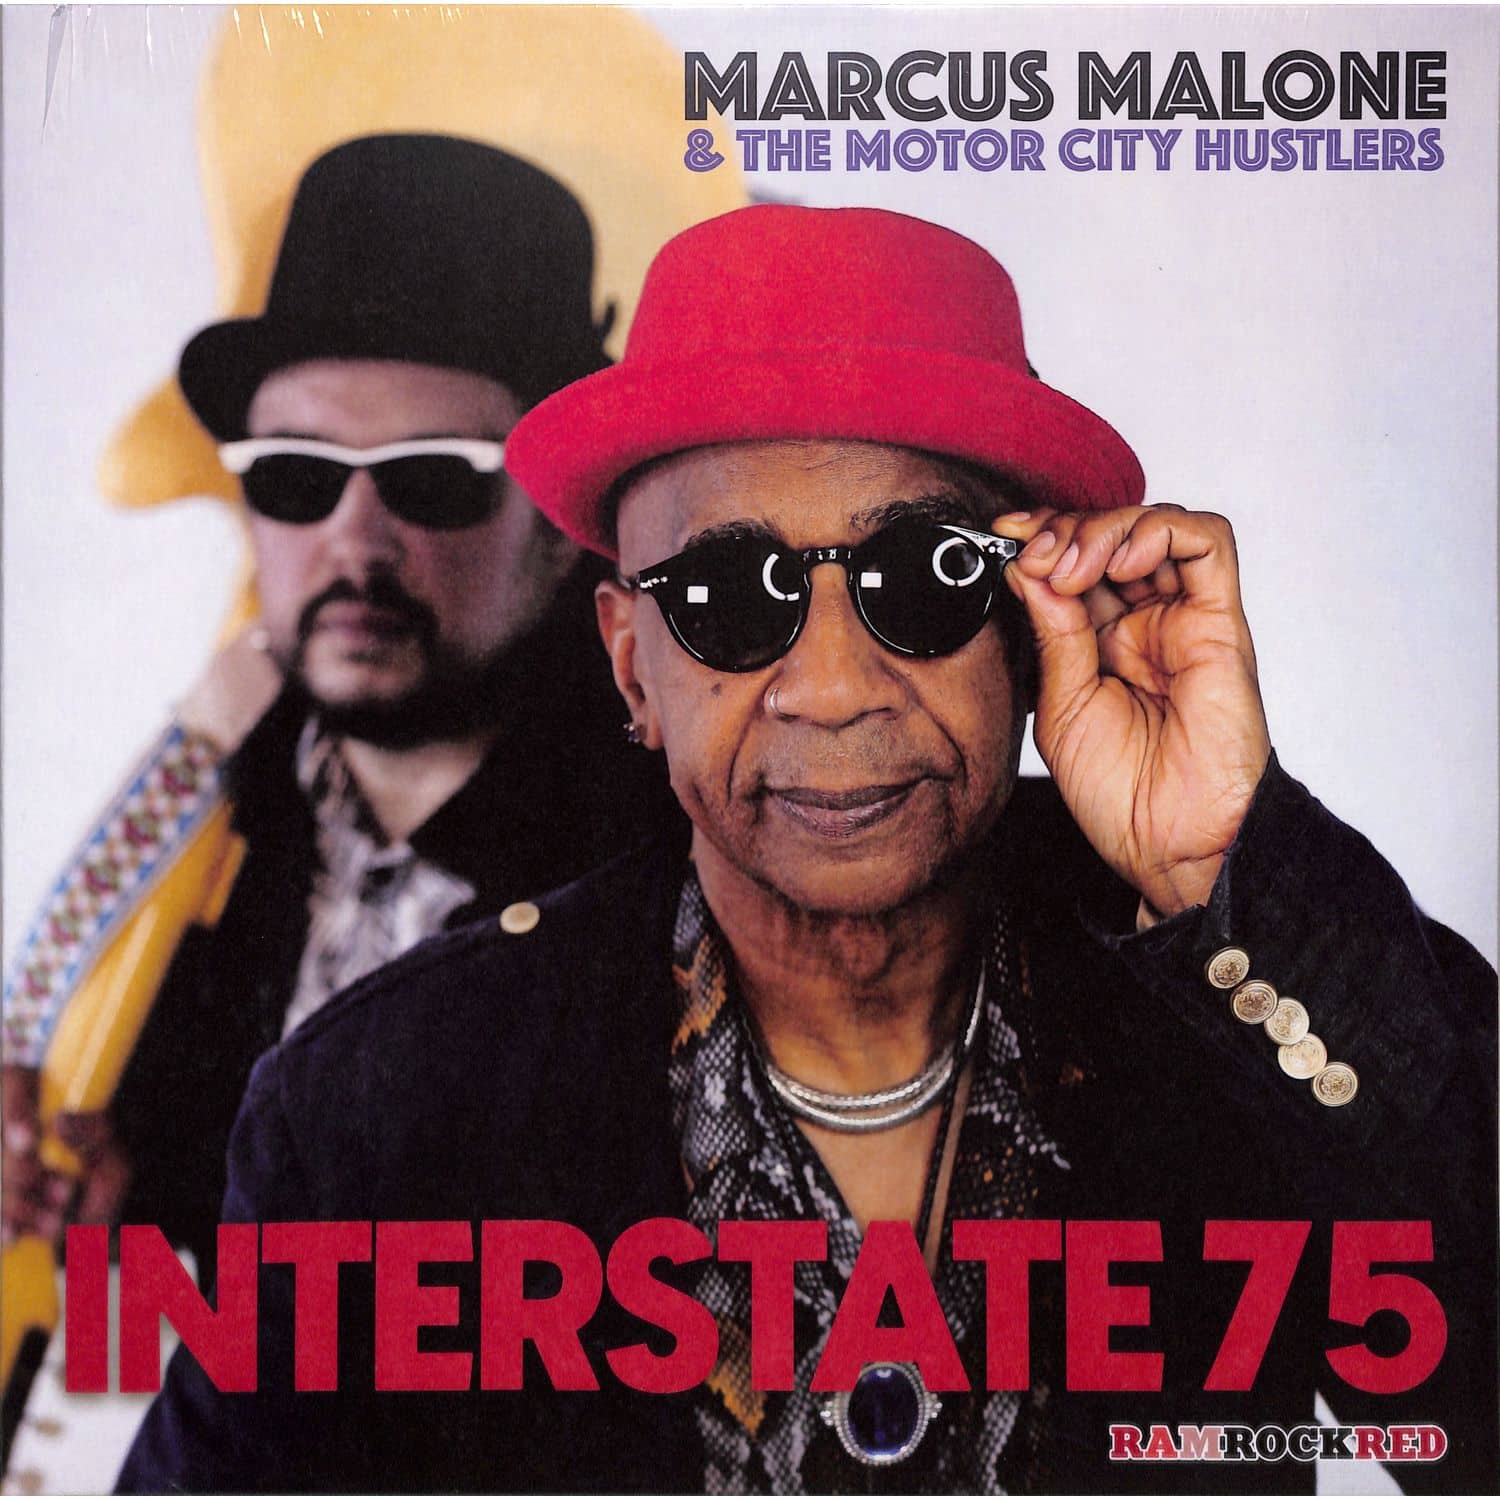 Marcus Malone & The Motor City Hustlers - INTERSTATE 75 